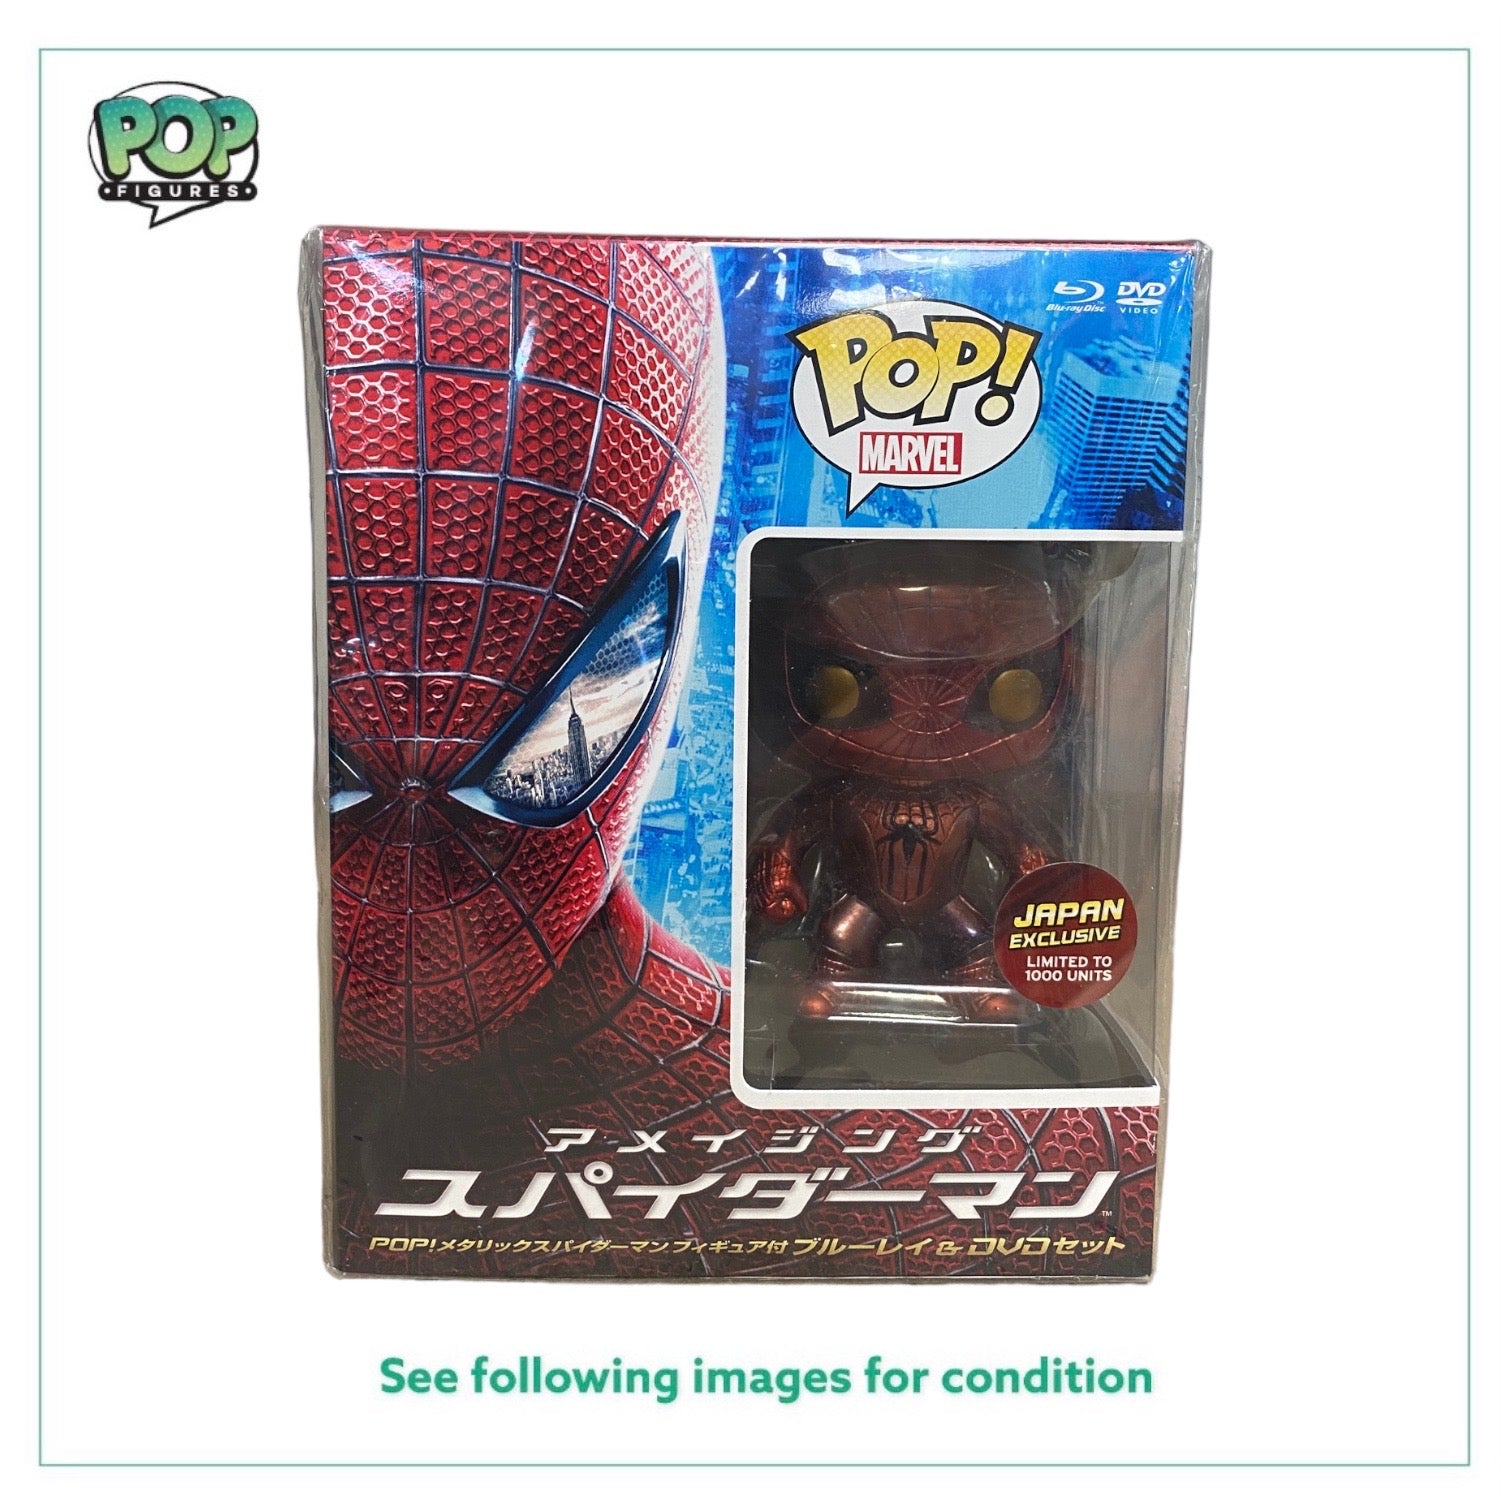 The Amazing Spider-Man (Metallic) Blu-ray Funko Pop Bundle - Marvel - Sealed - Japan Exclusive LE1000 Units - Condition 9/10